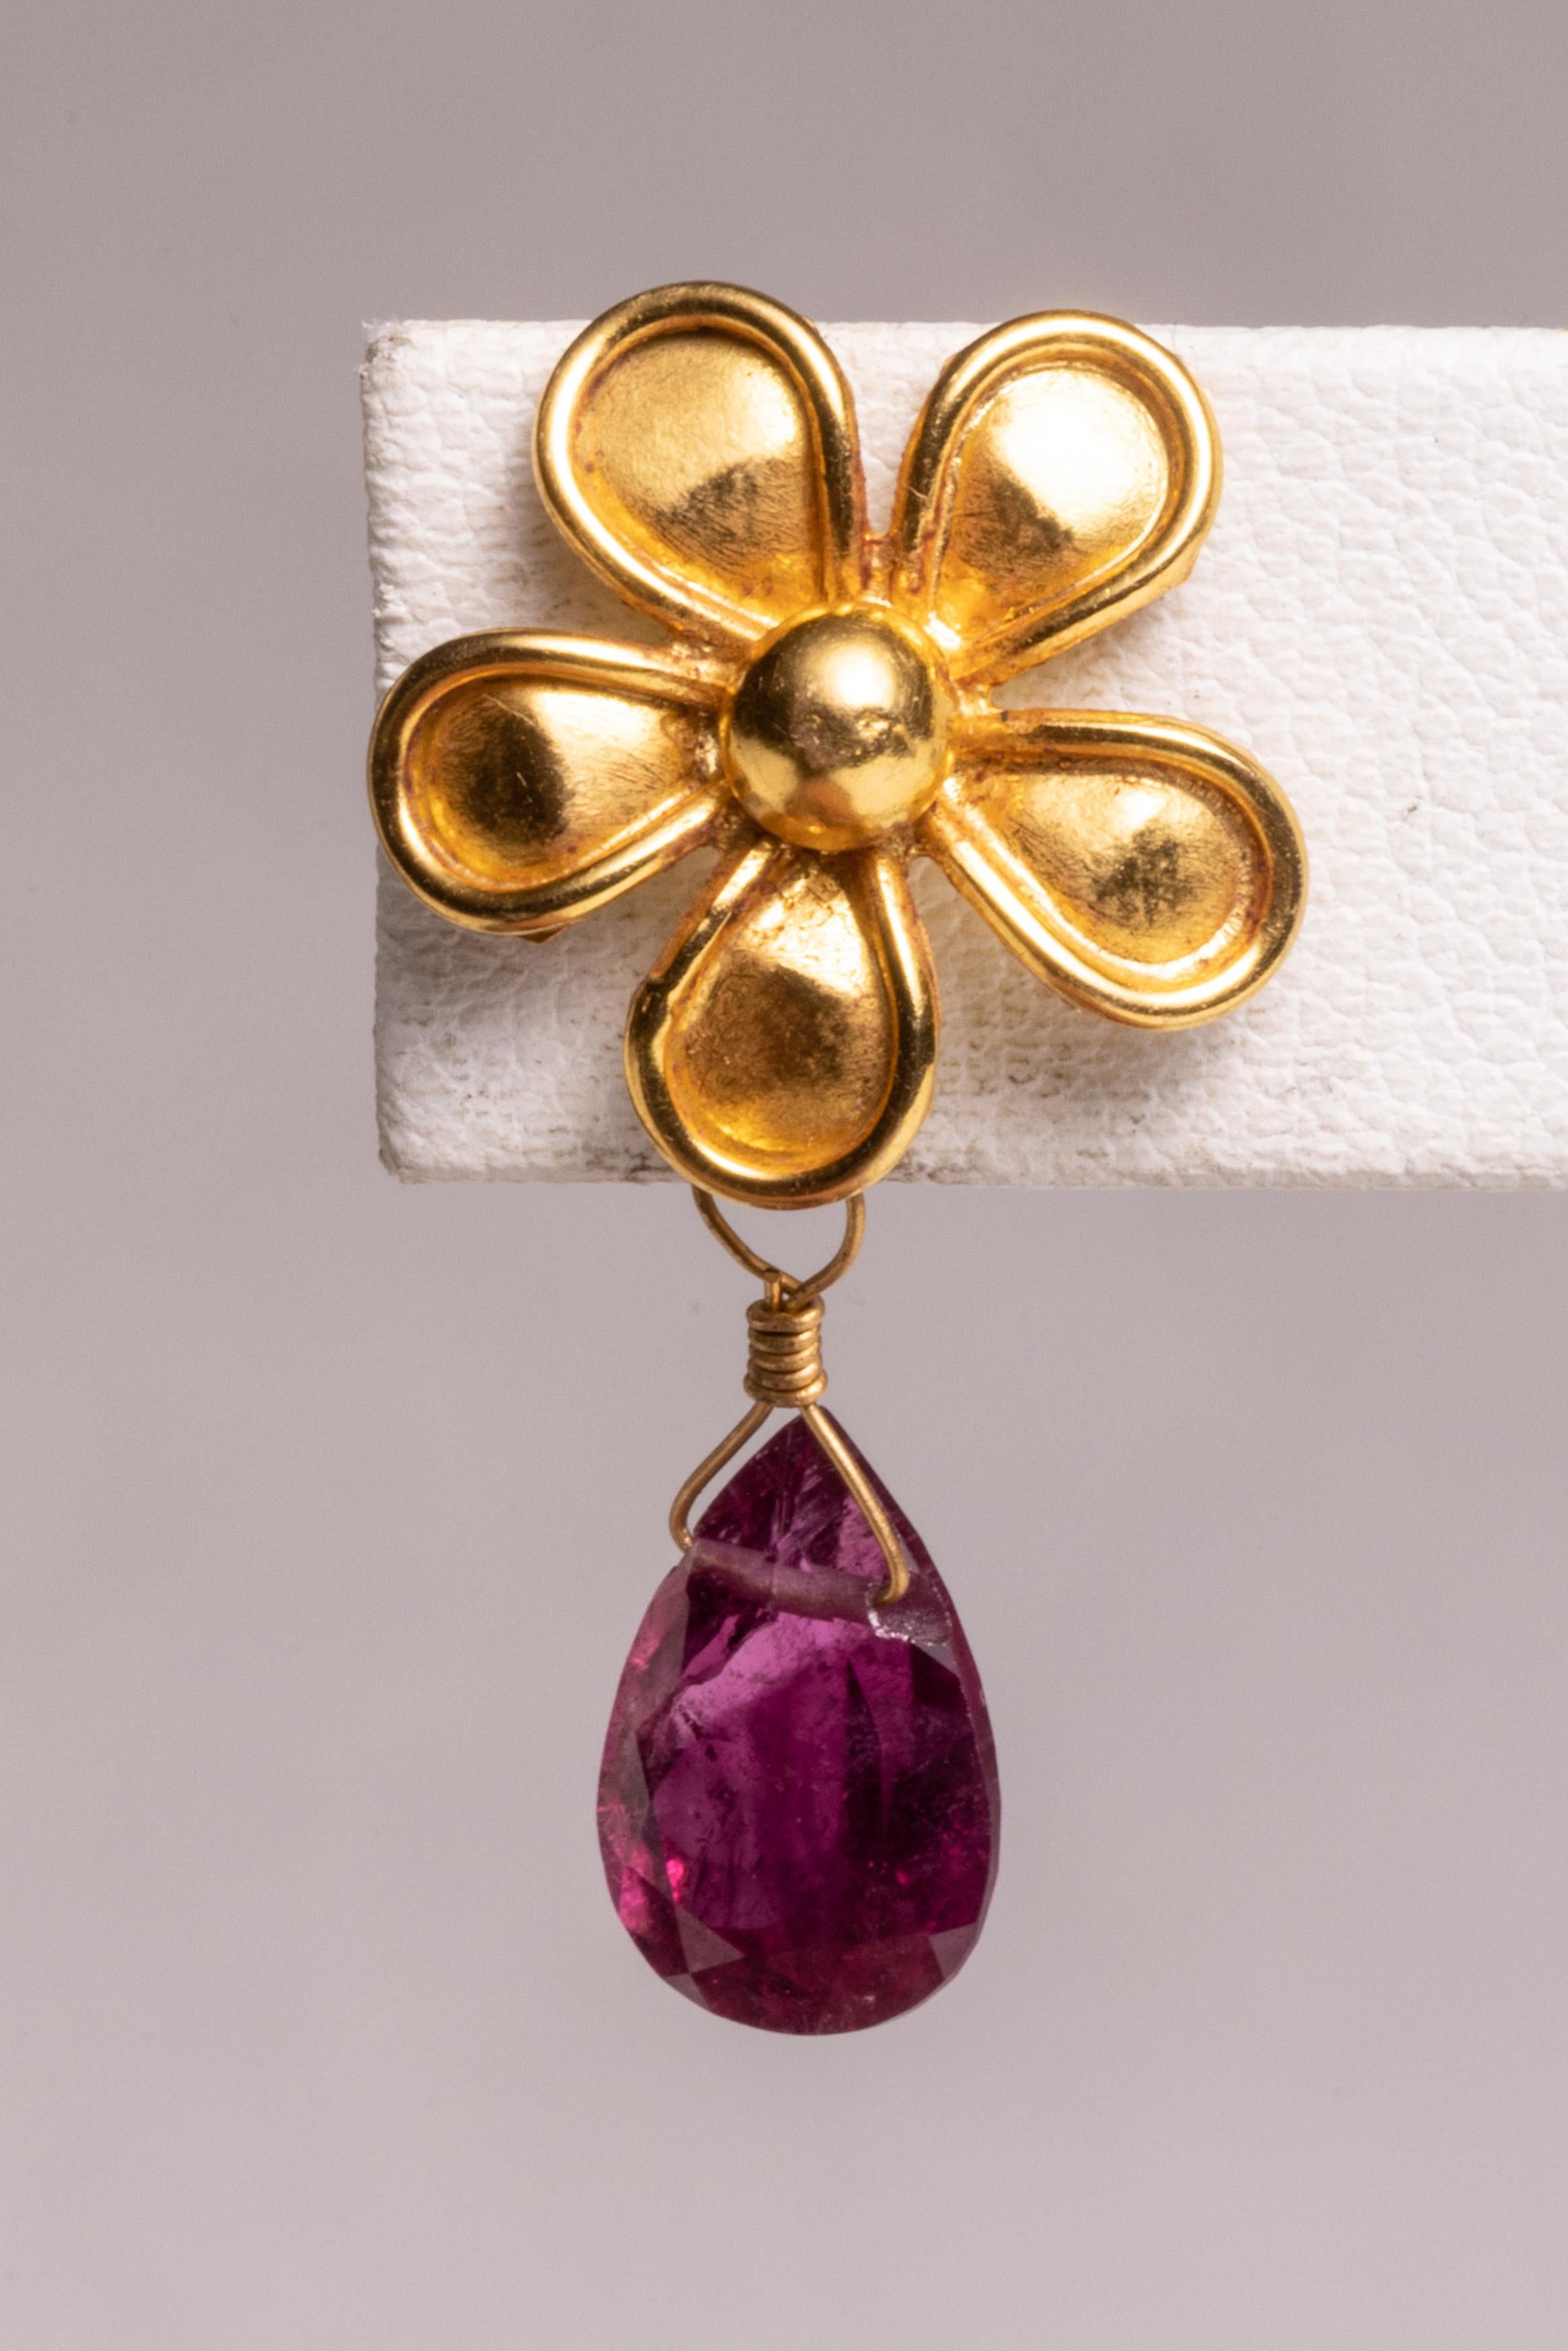 A lovely 22K gold flower post earring with a pear-shaped, faceted pink tourmaline briolette drop.  For pierced ears.

The fine jewelry collection is sourced, designed or created by Deborah Lockhart Phillips. Through her international travels, she